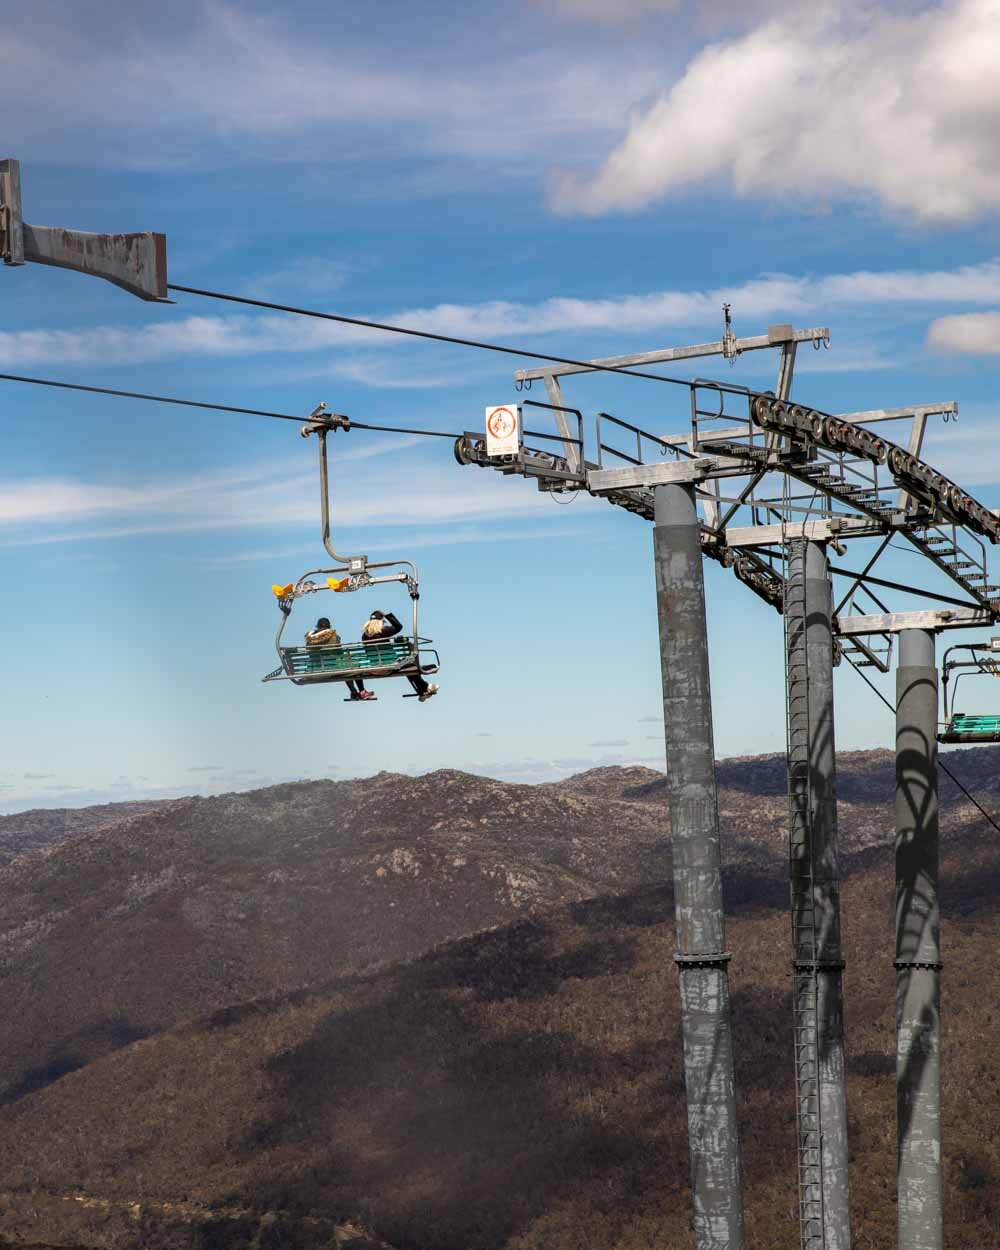 Rise the Thredbo Chairlift